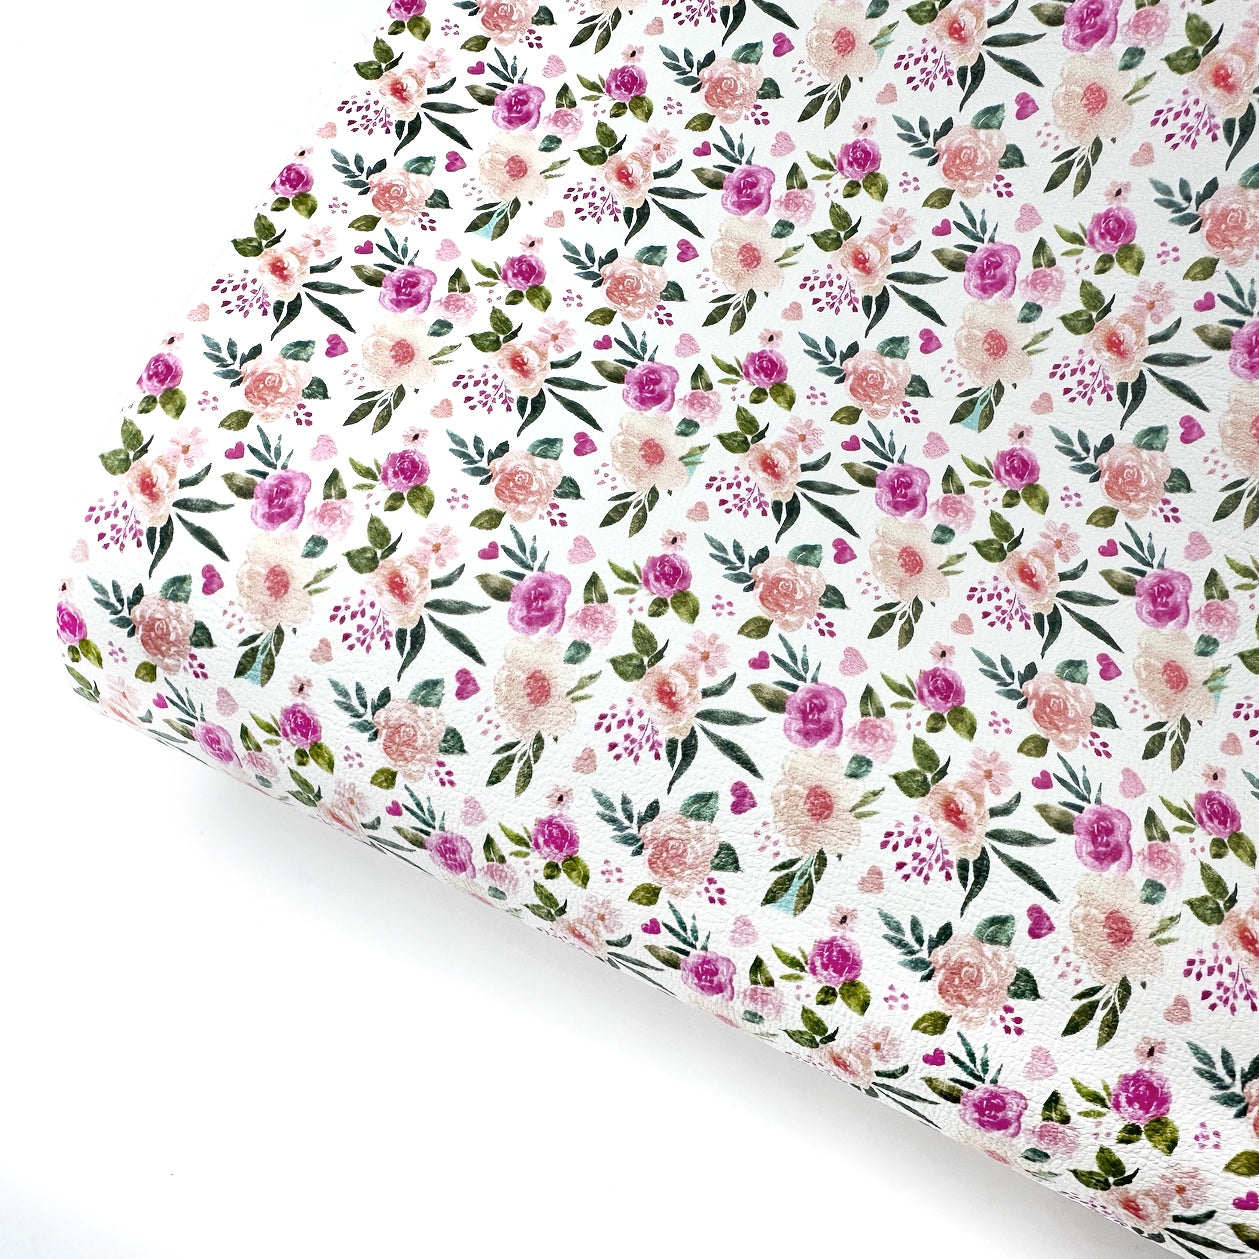 White Heart Floral Premium Faux Leather Fabric Sheets